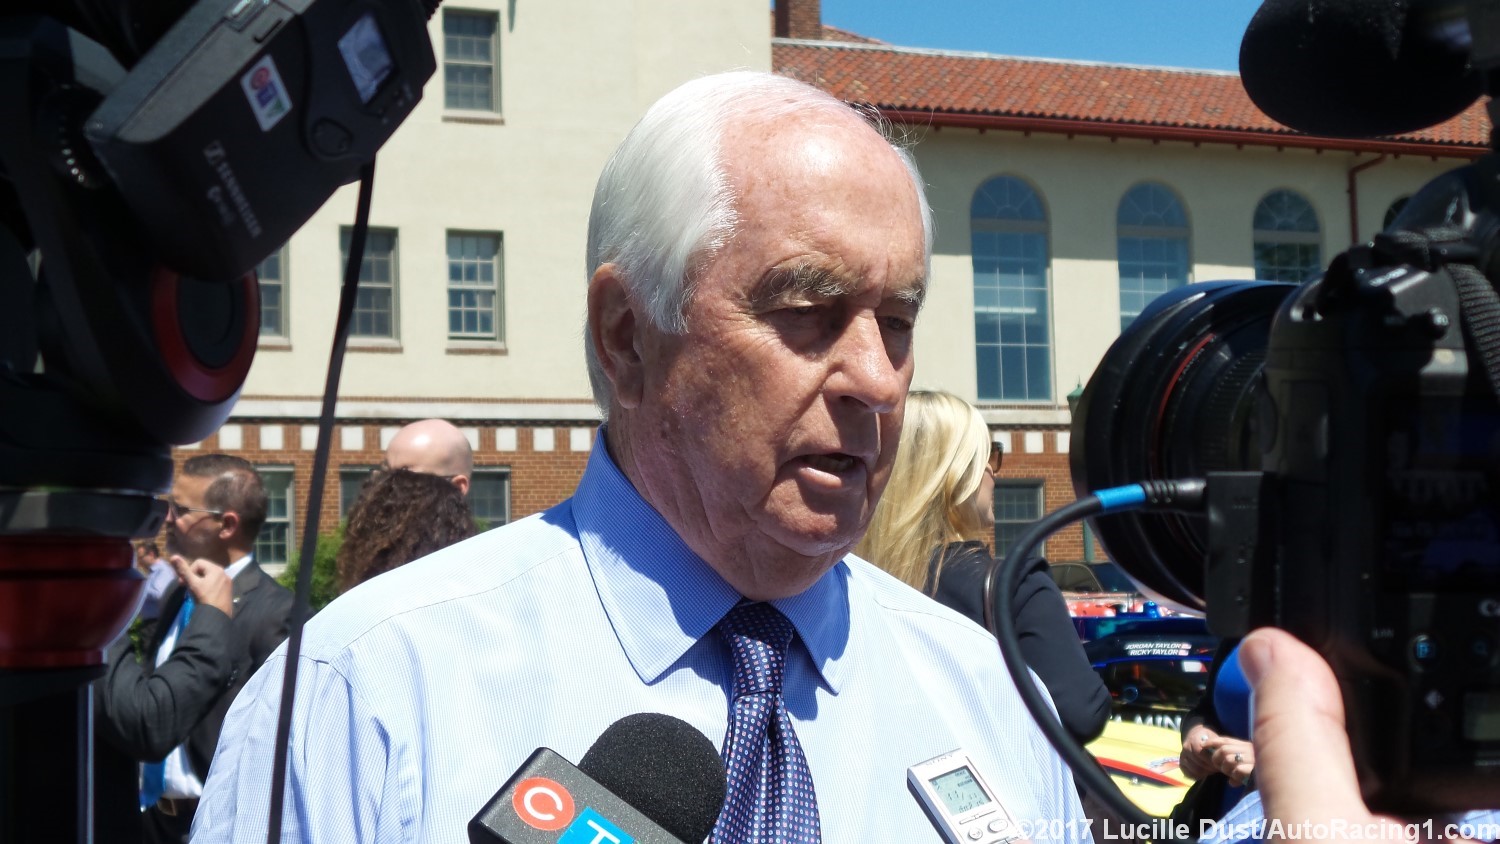 Roger Penske talks to reporters Thursday about upgrades to Belle Isle